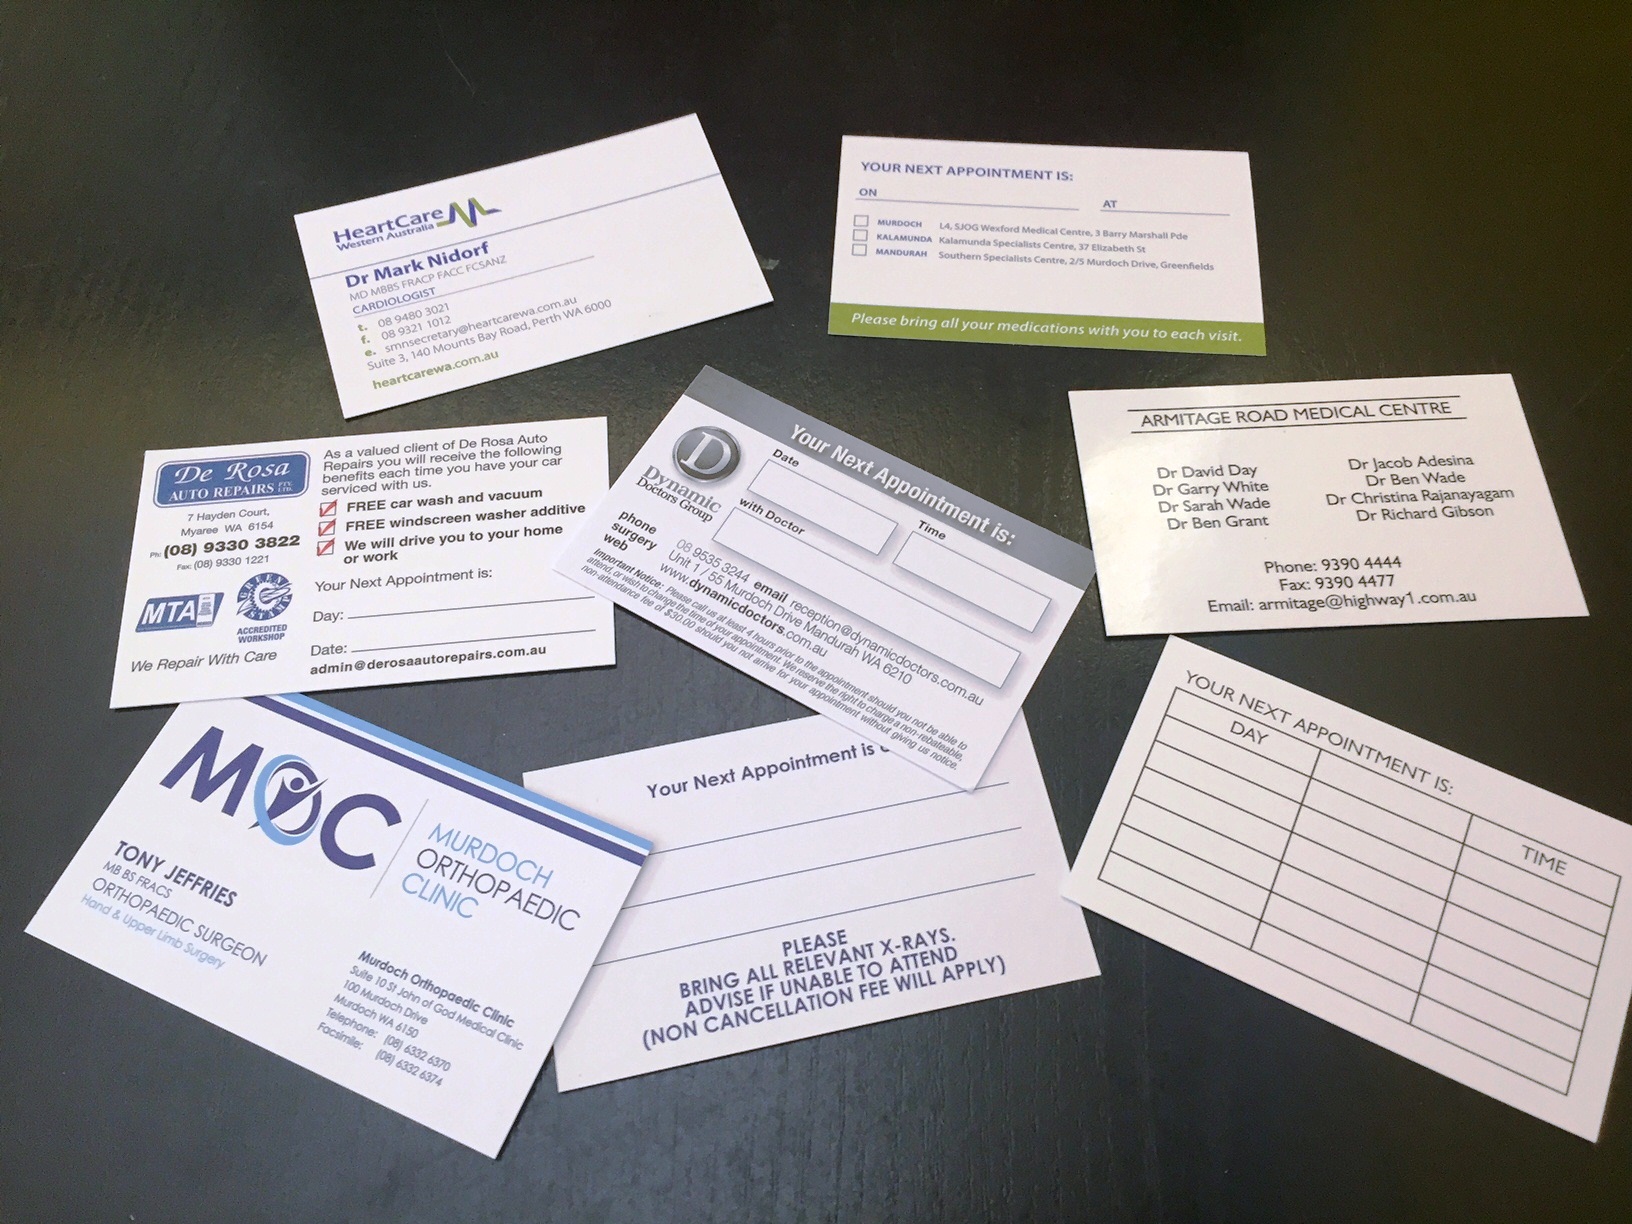 Printed Appointment Cards by G Force Printing Perth